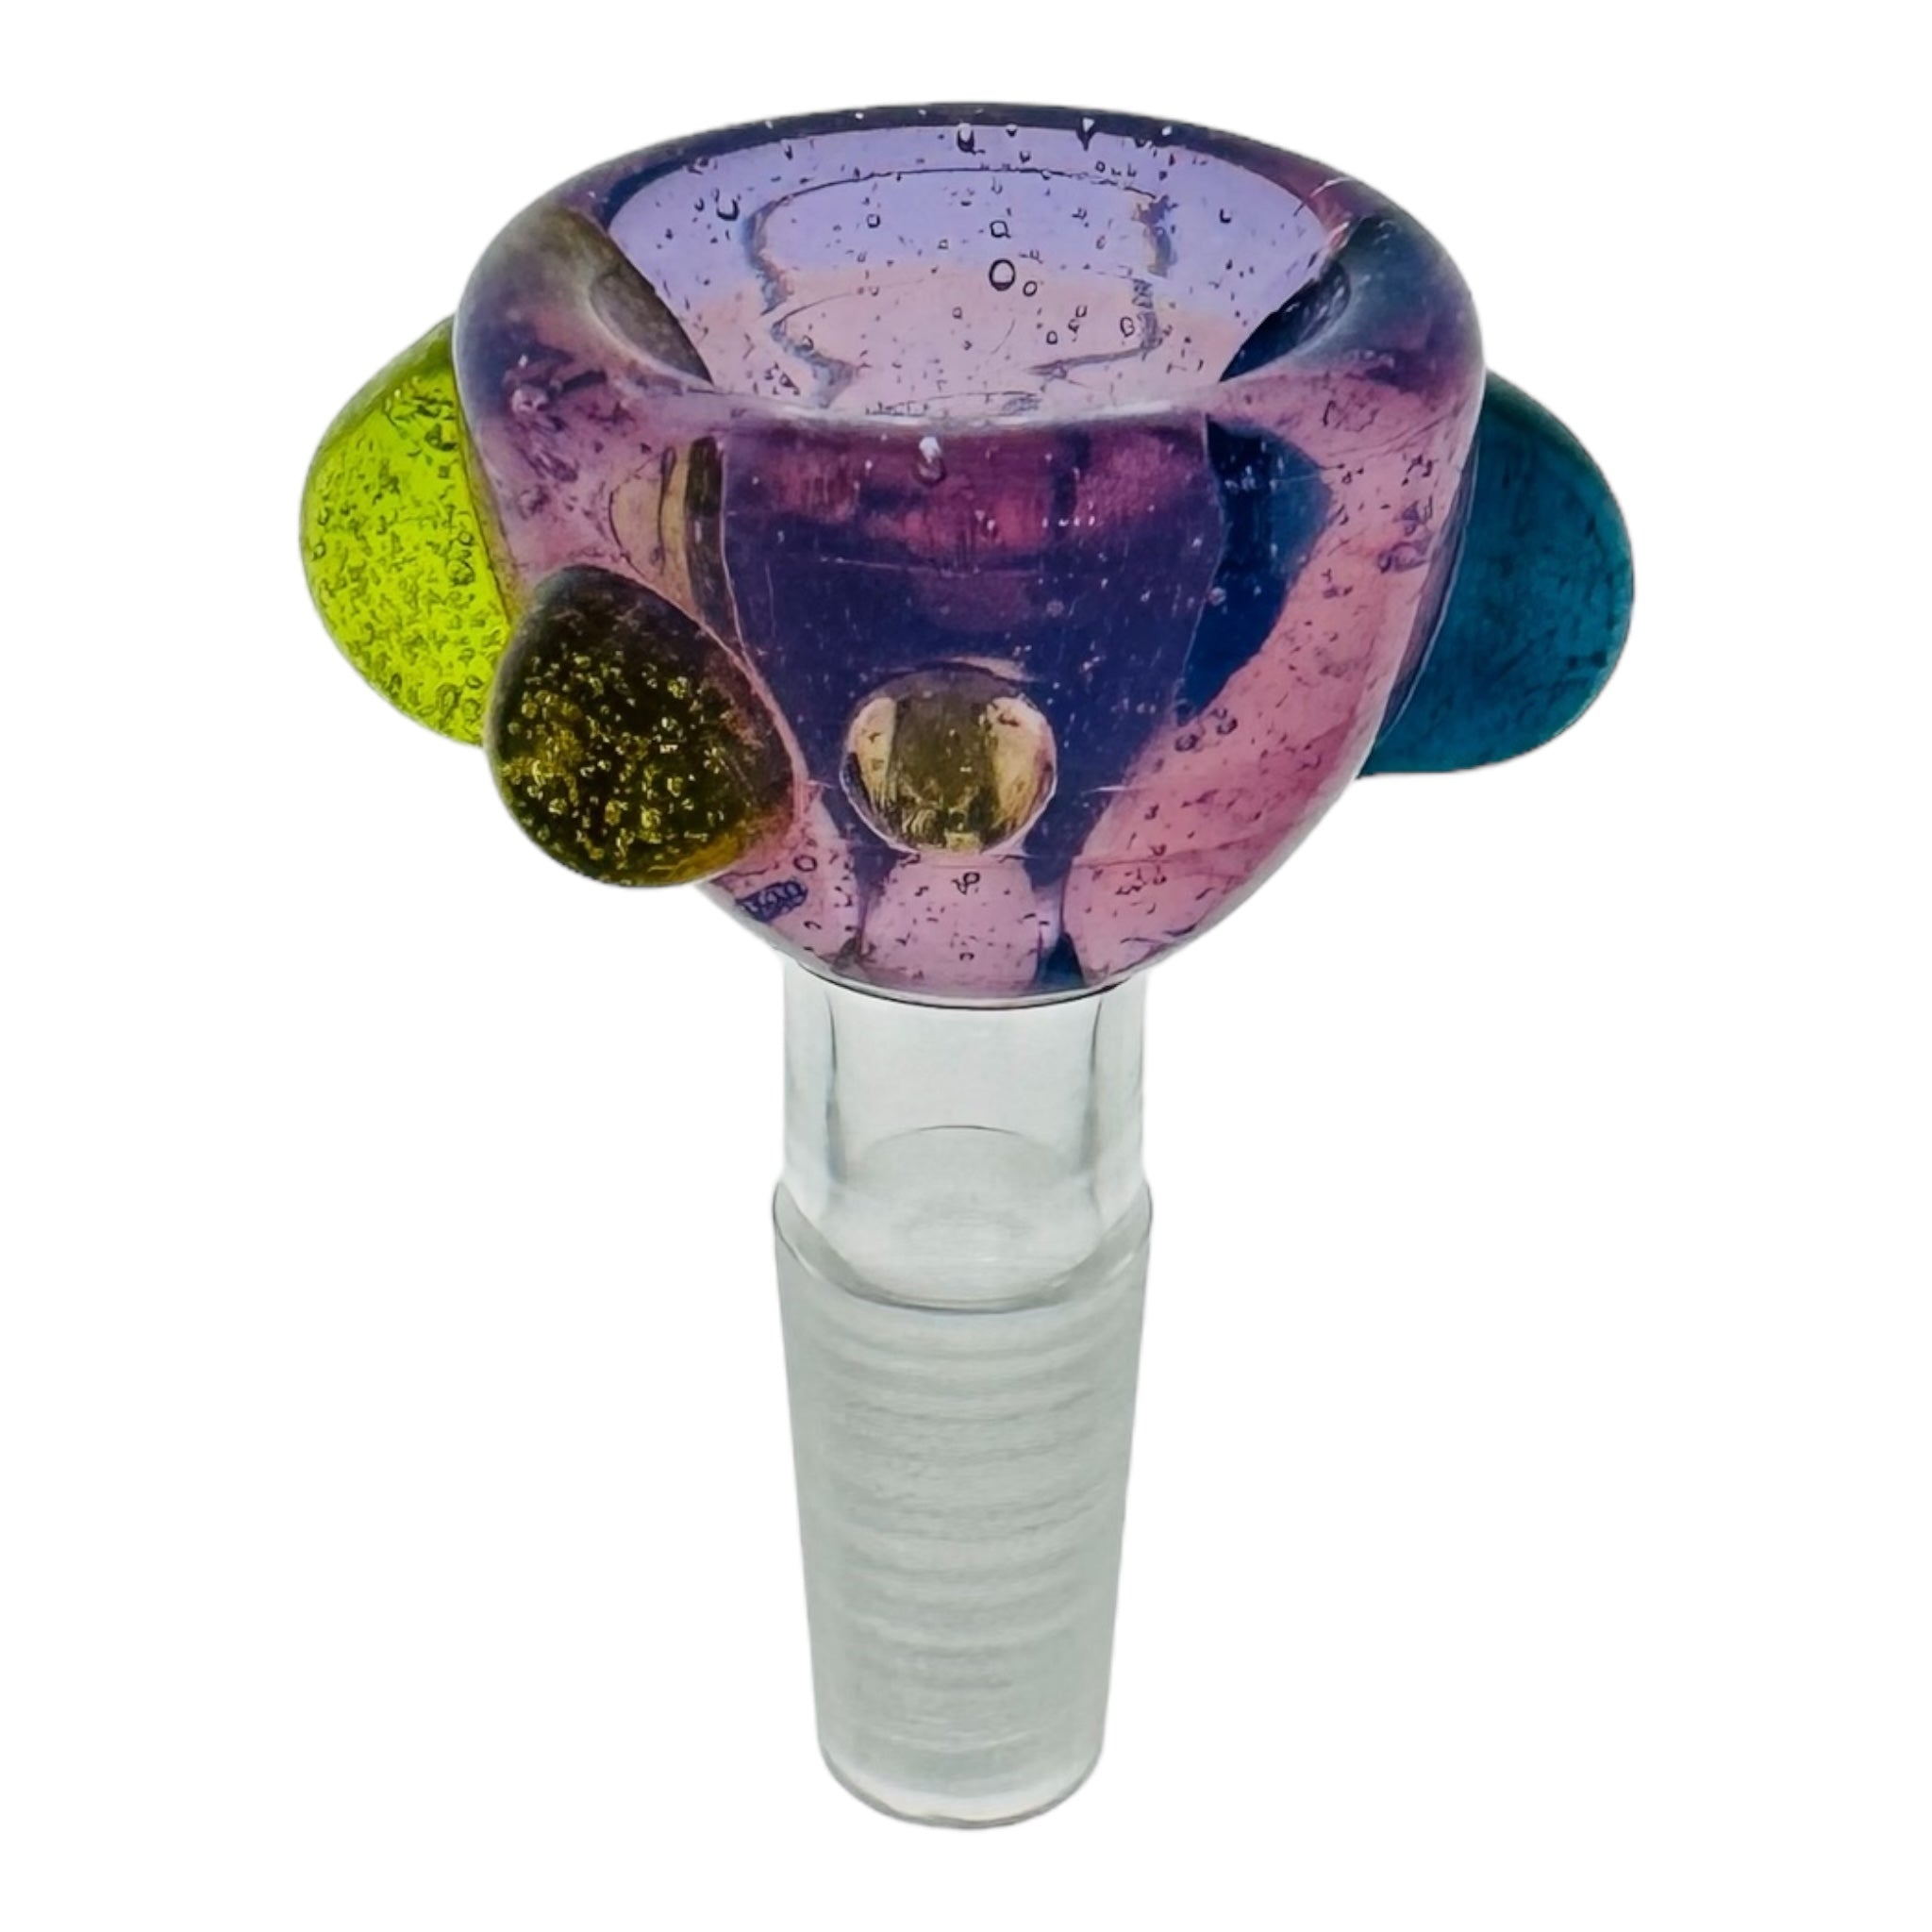 Arko Glass 10mm Bong Bowl For Weed Wysteria Purple Bowl With Green And Blue Dots